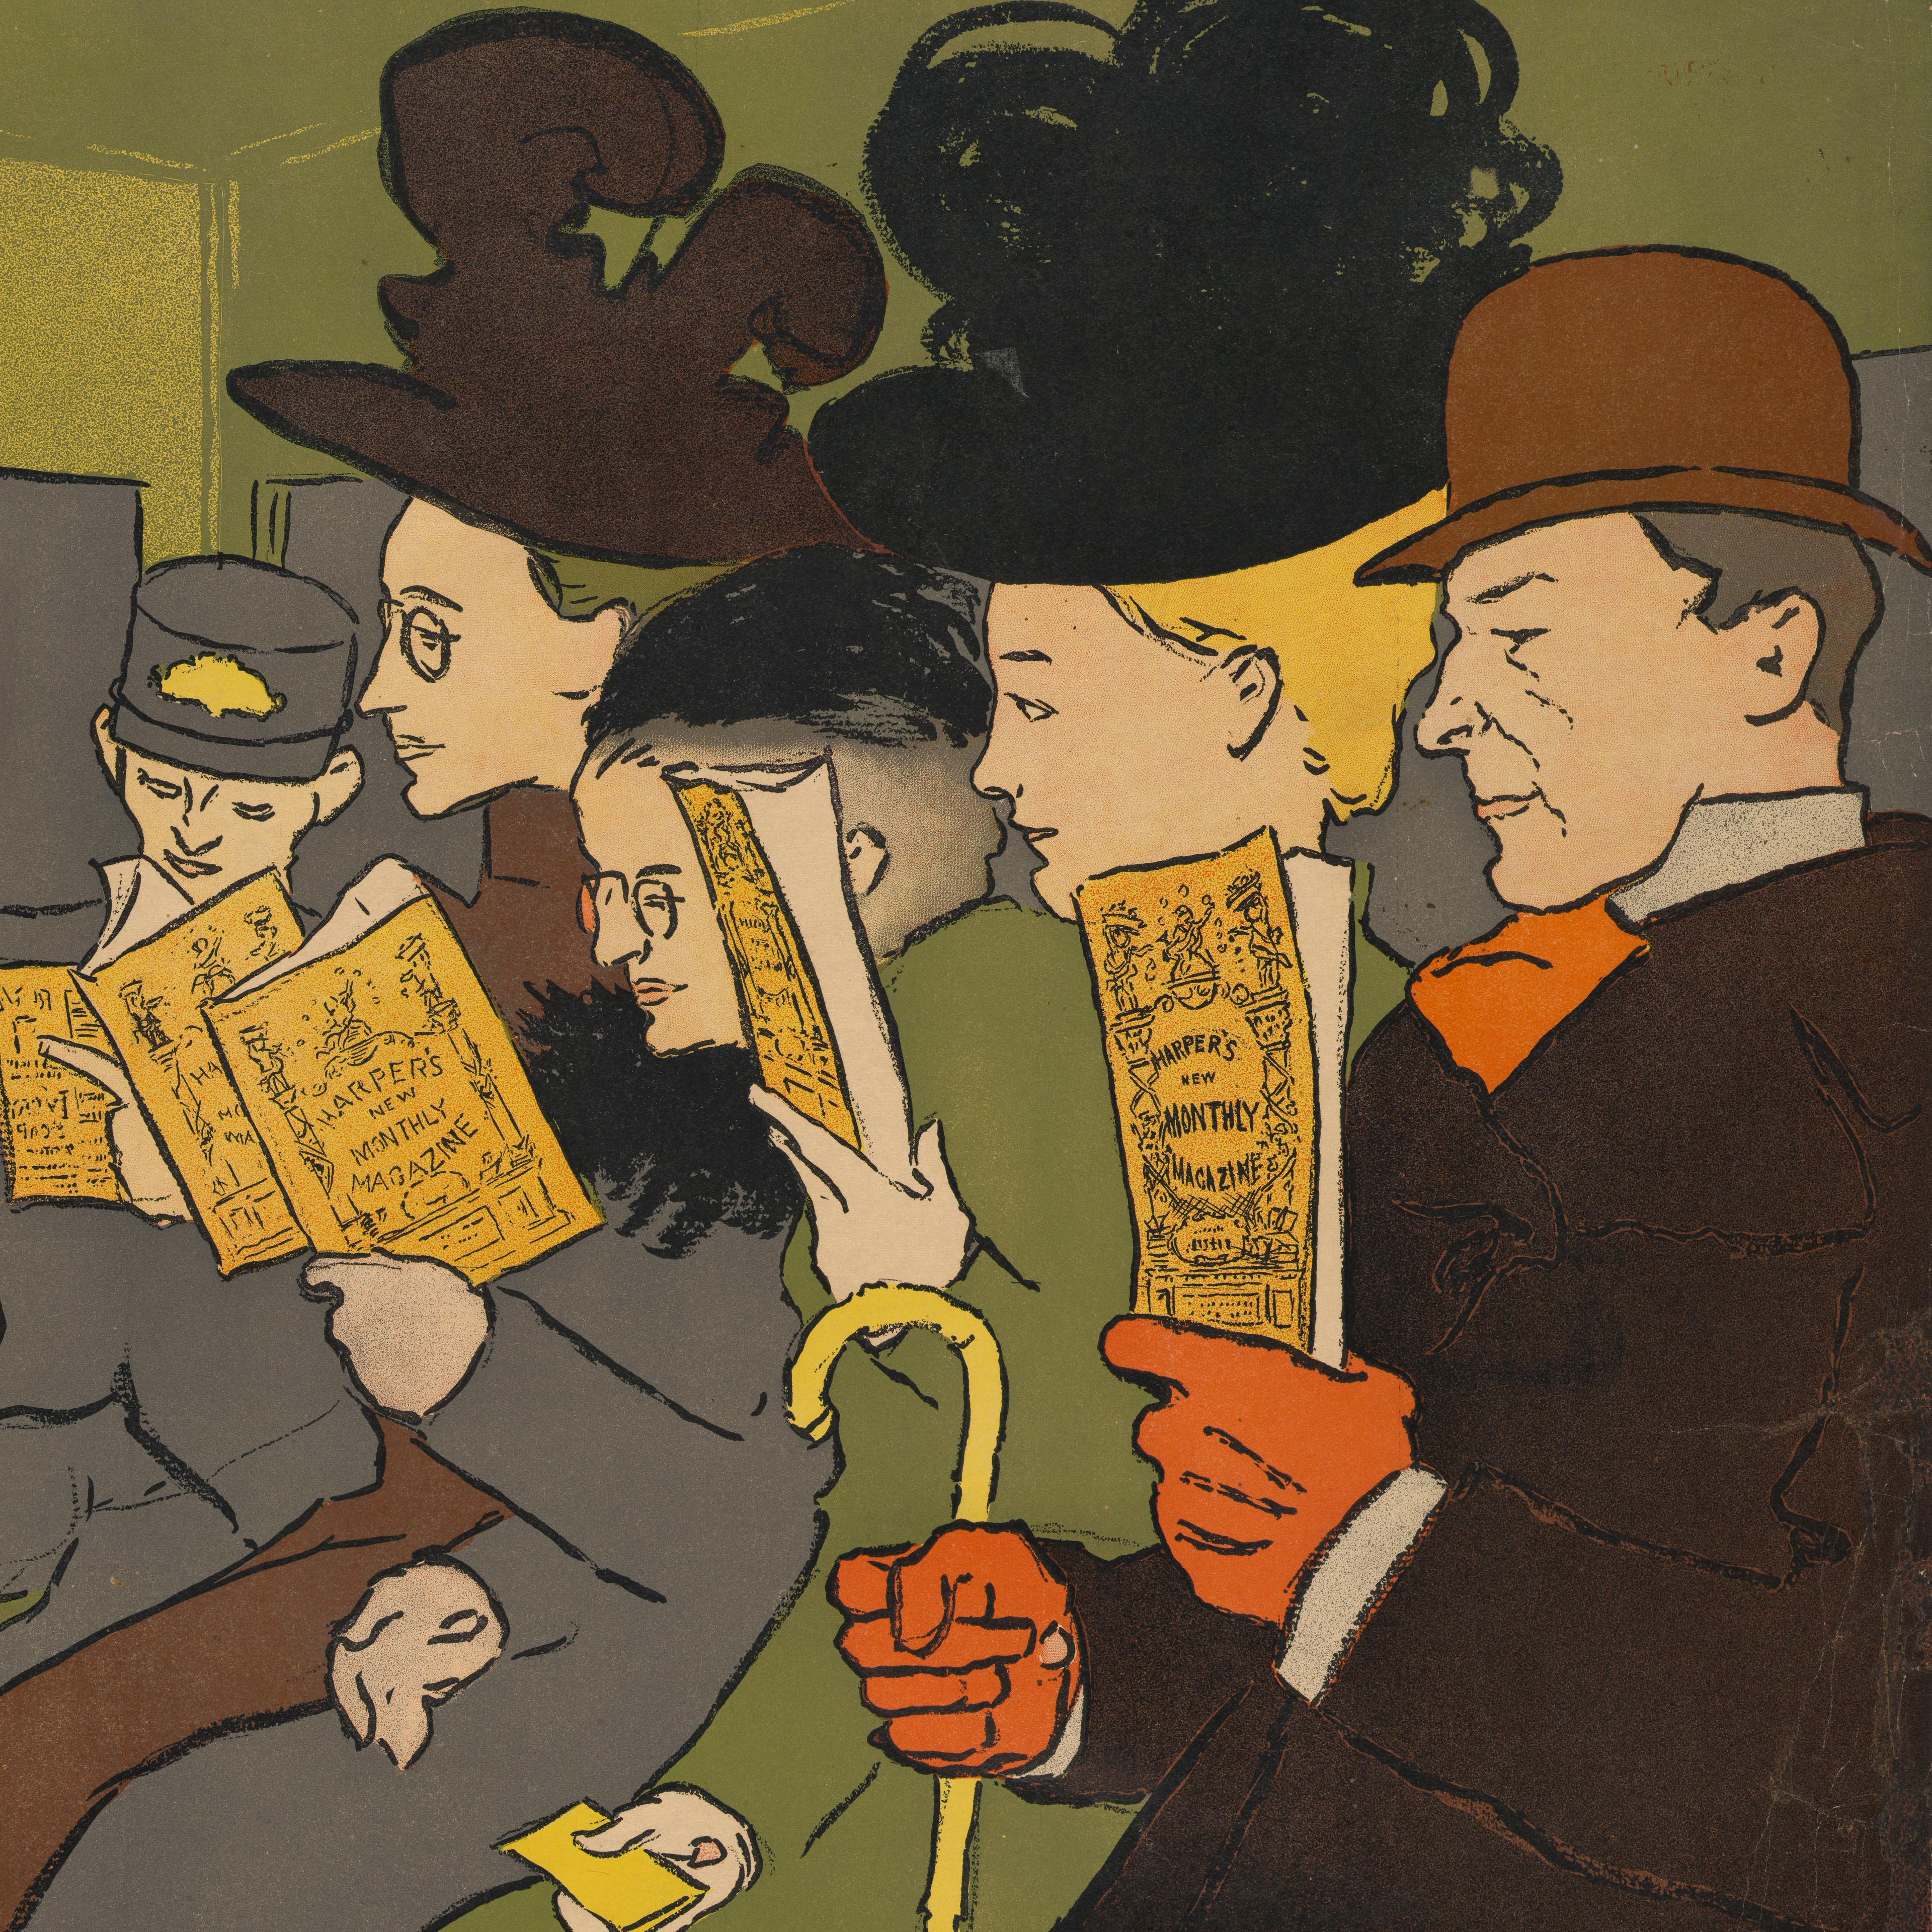 Group of people sitting reading a magazine